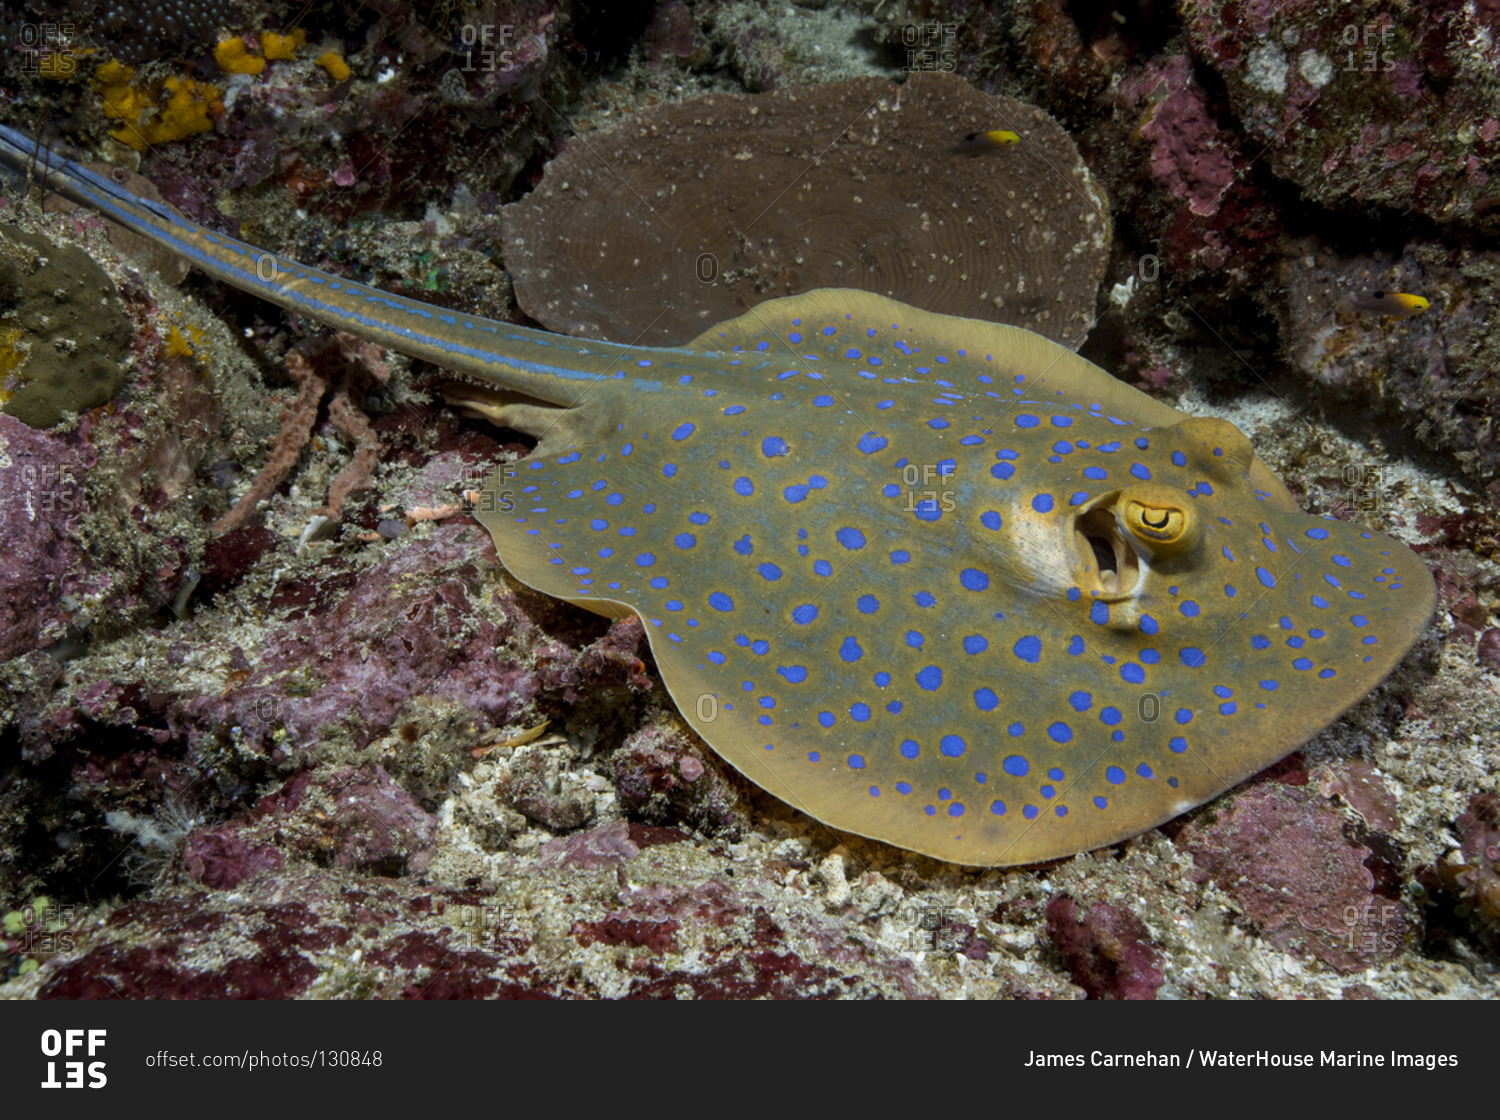 Blue-spotted stingray resting on the ocean floor